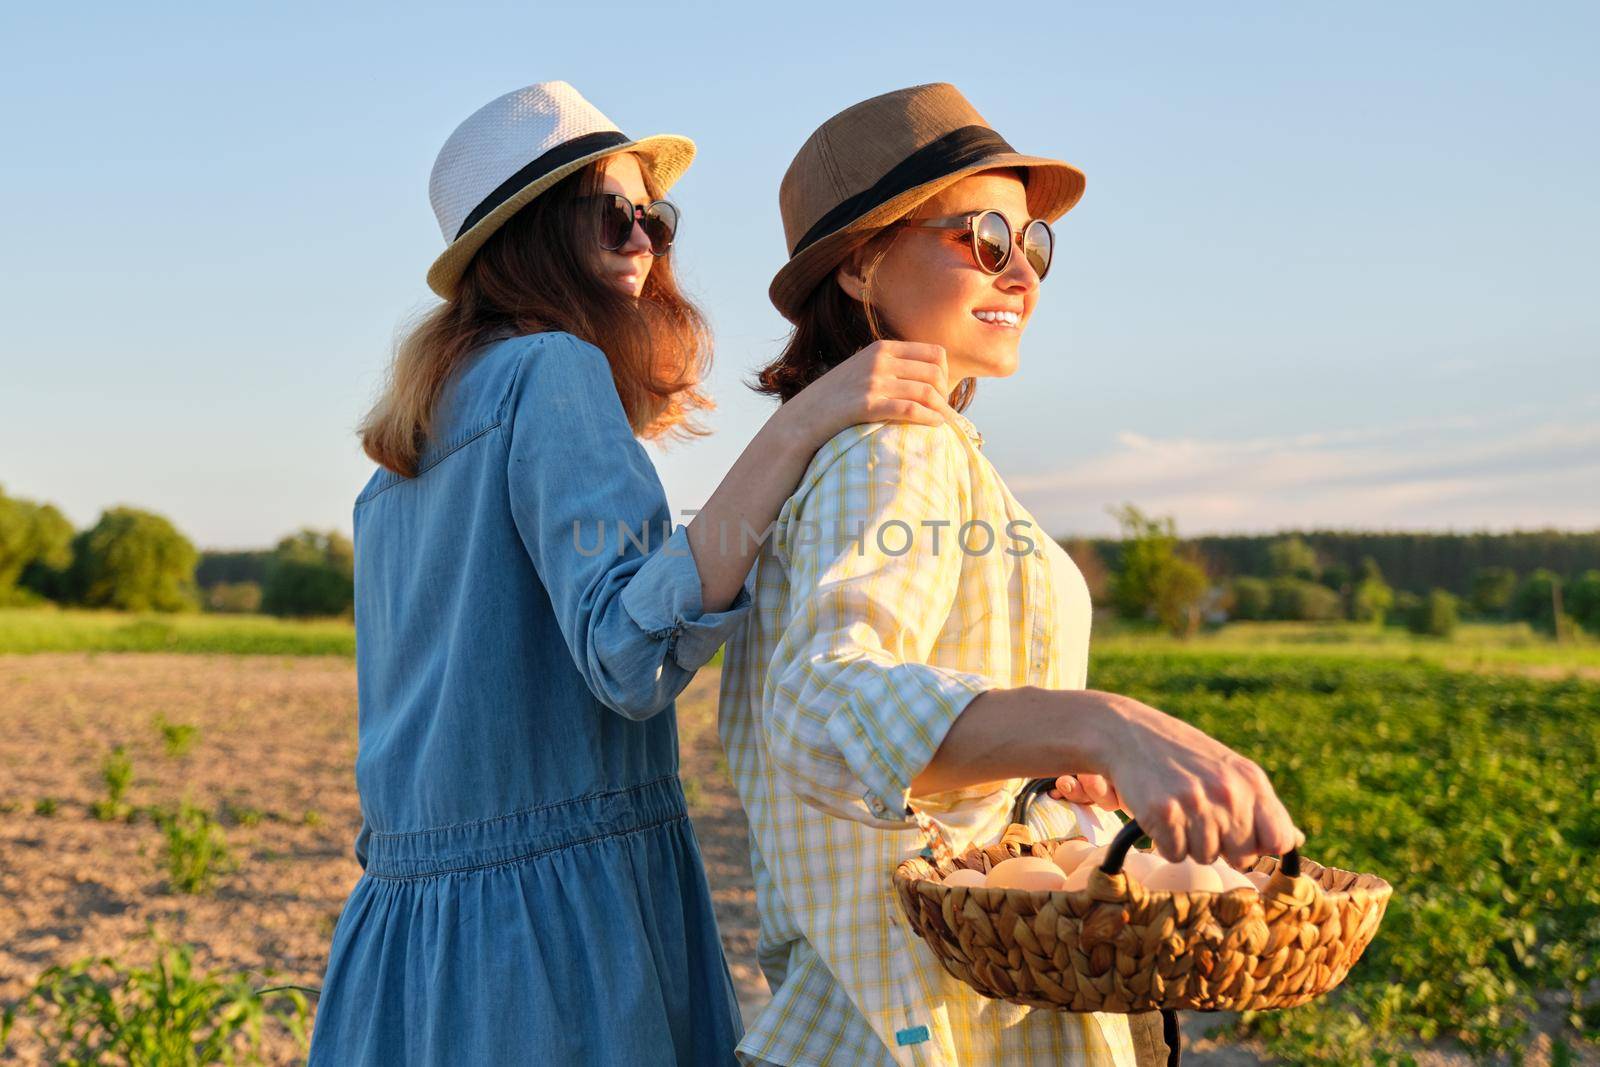 Women mother and daughter with basket of eggs, lifestyle, nature, garden background by VH-studio